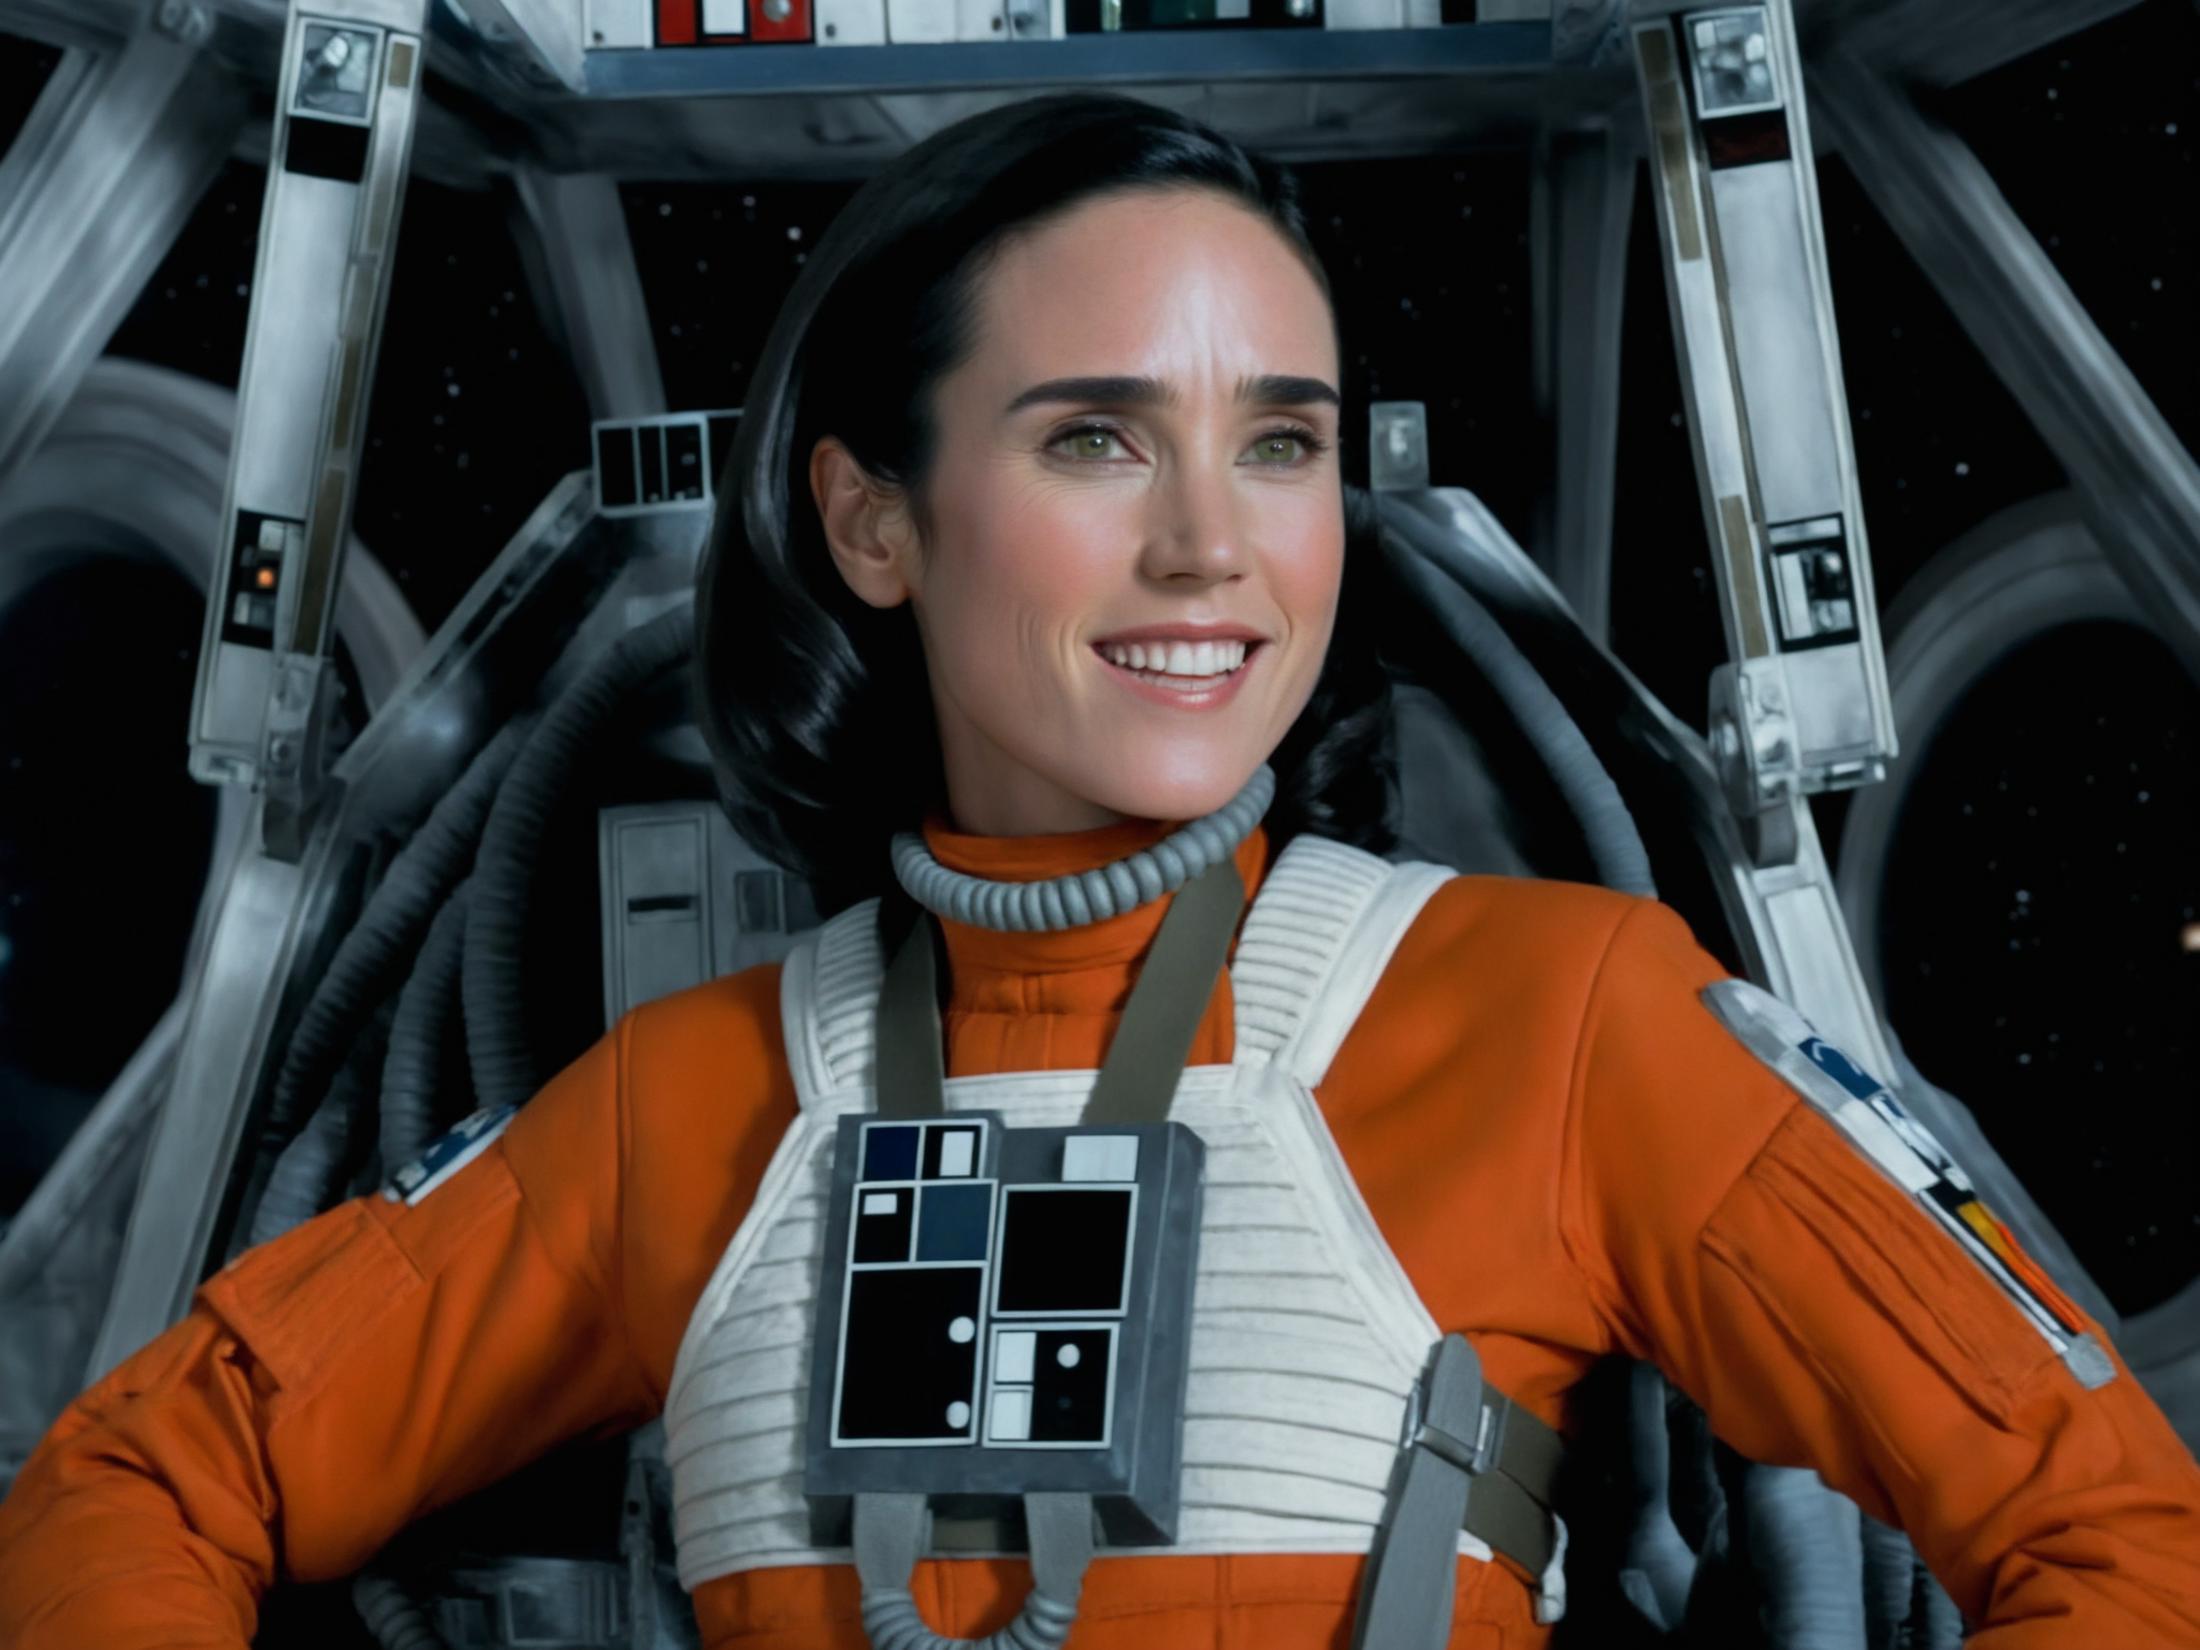 Jennifer Connelly image by impossiblebearcl4060